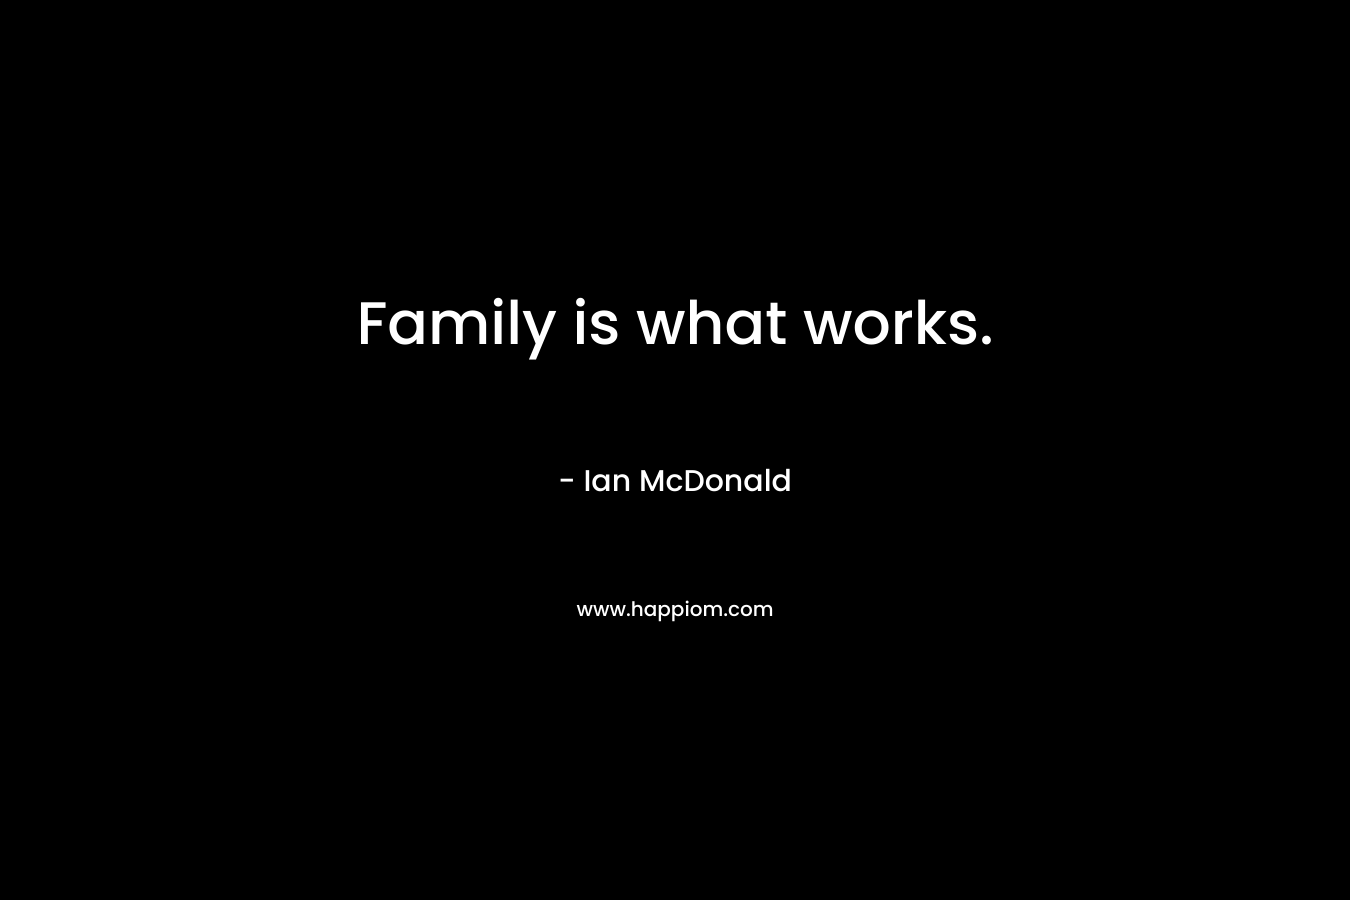 Family is what works. – Ian McDonald